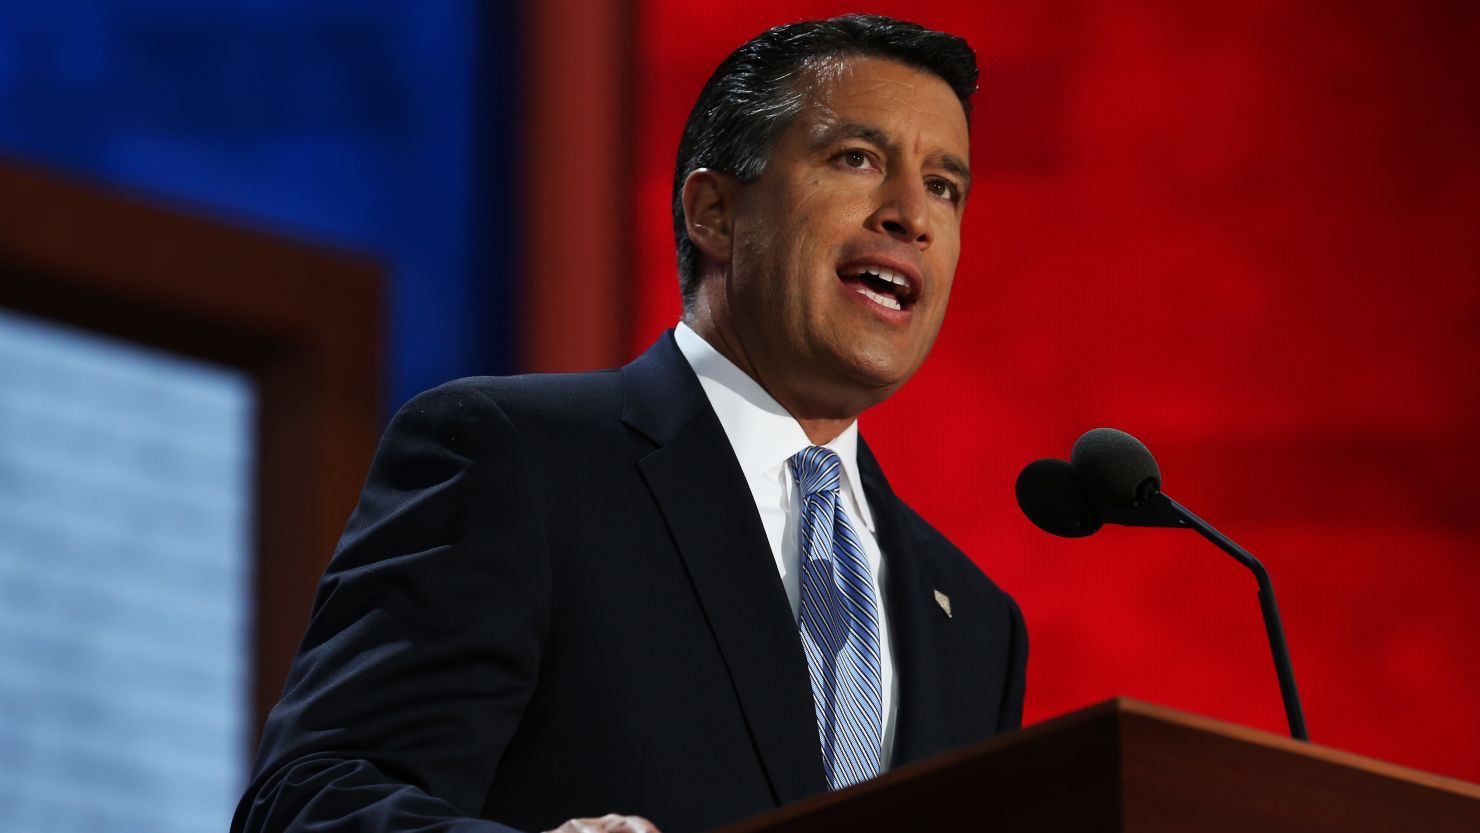 Nevada Gov. Brian Sandoval is seen as a crucial voice on the GOP's health care effort because Sen. Dean Heller has tied his own vote closely to the popular Republican governor's position.